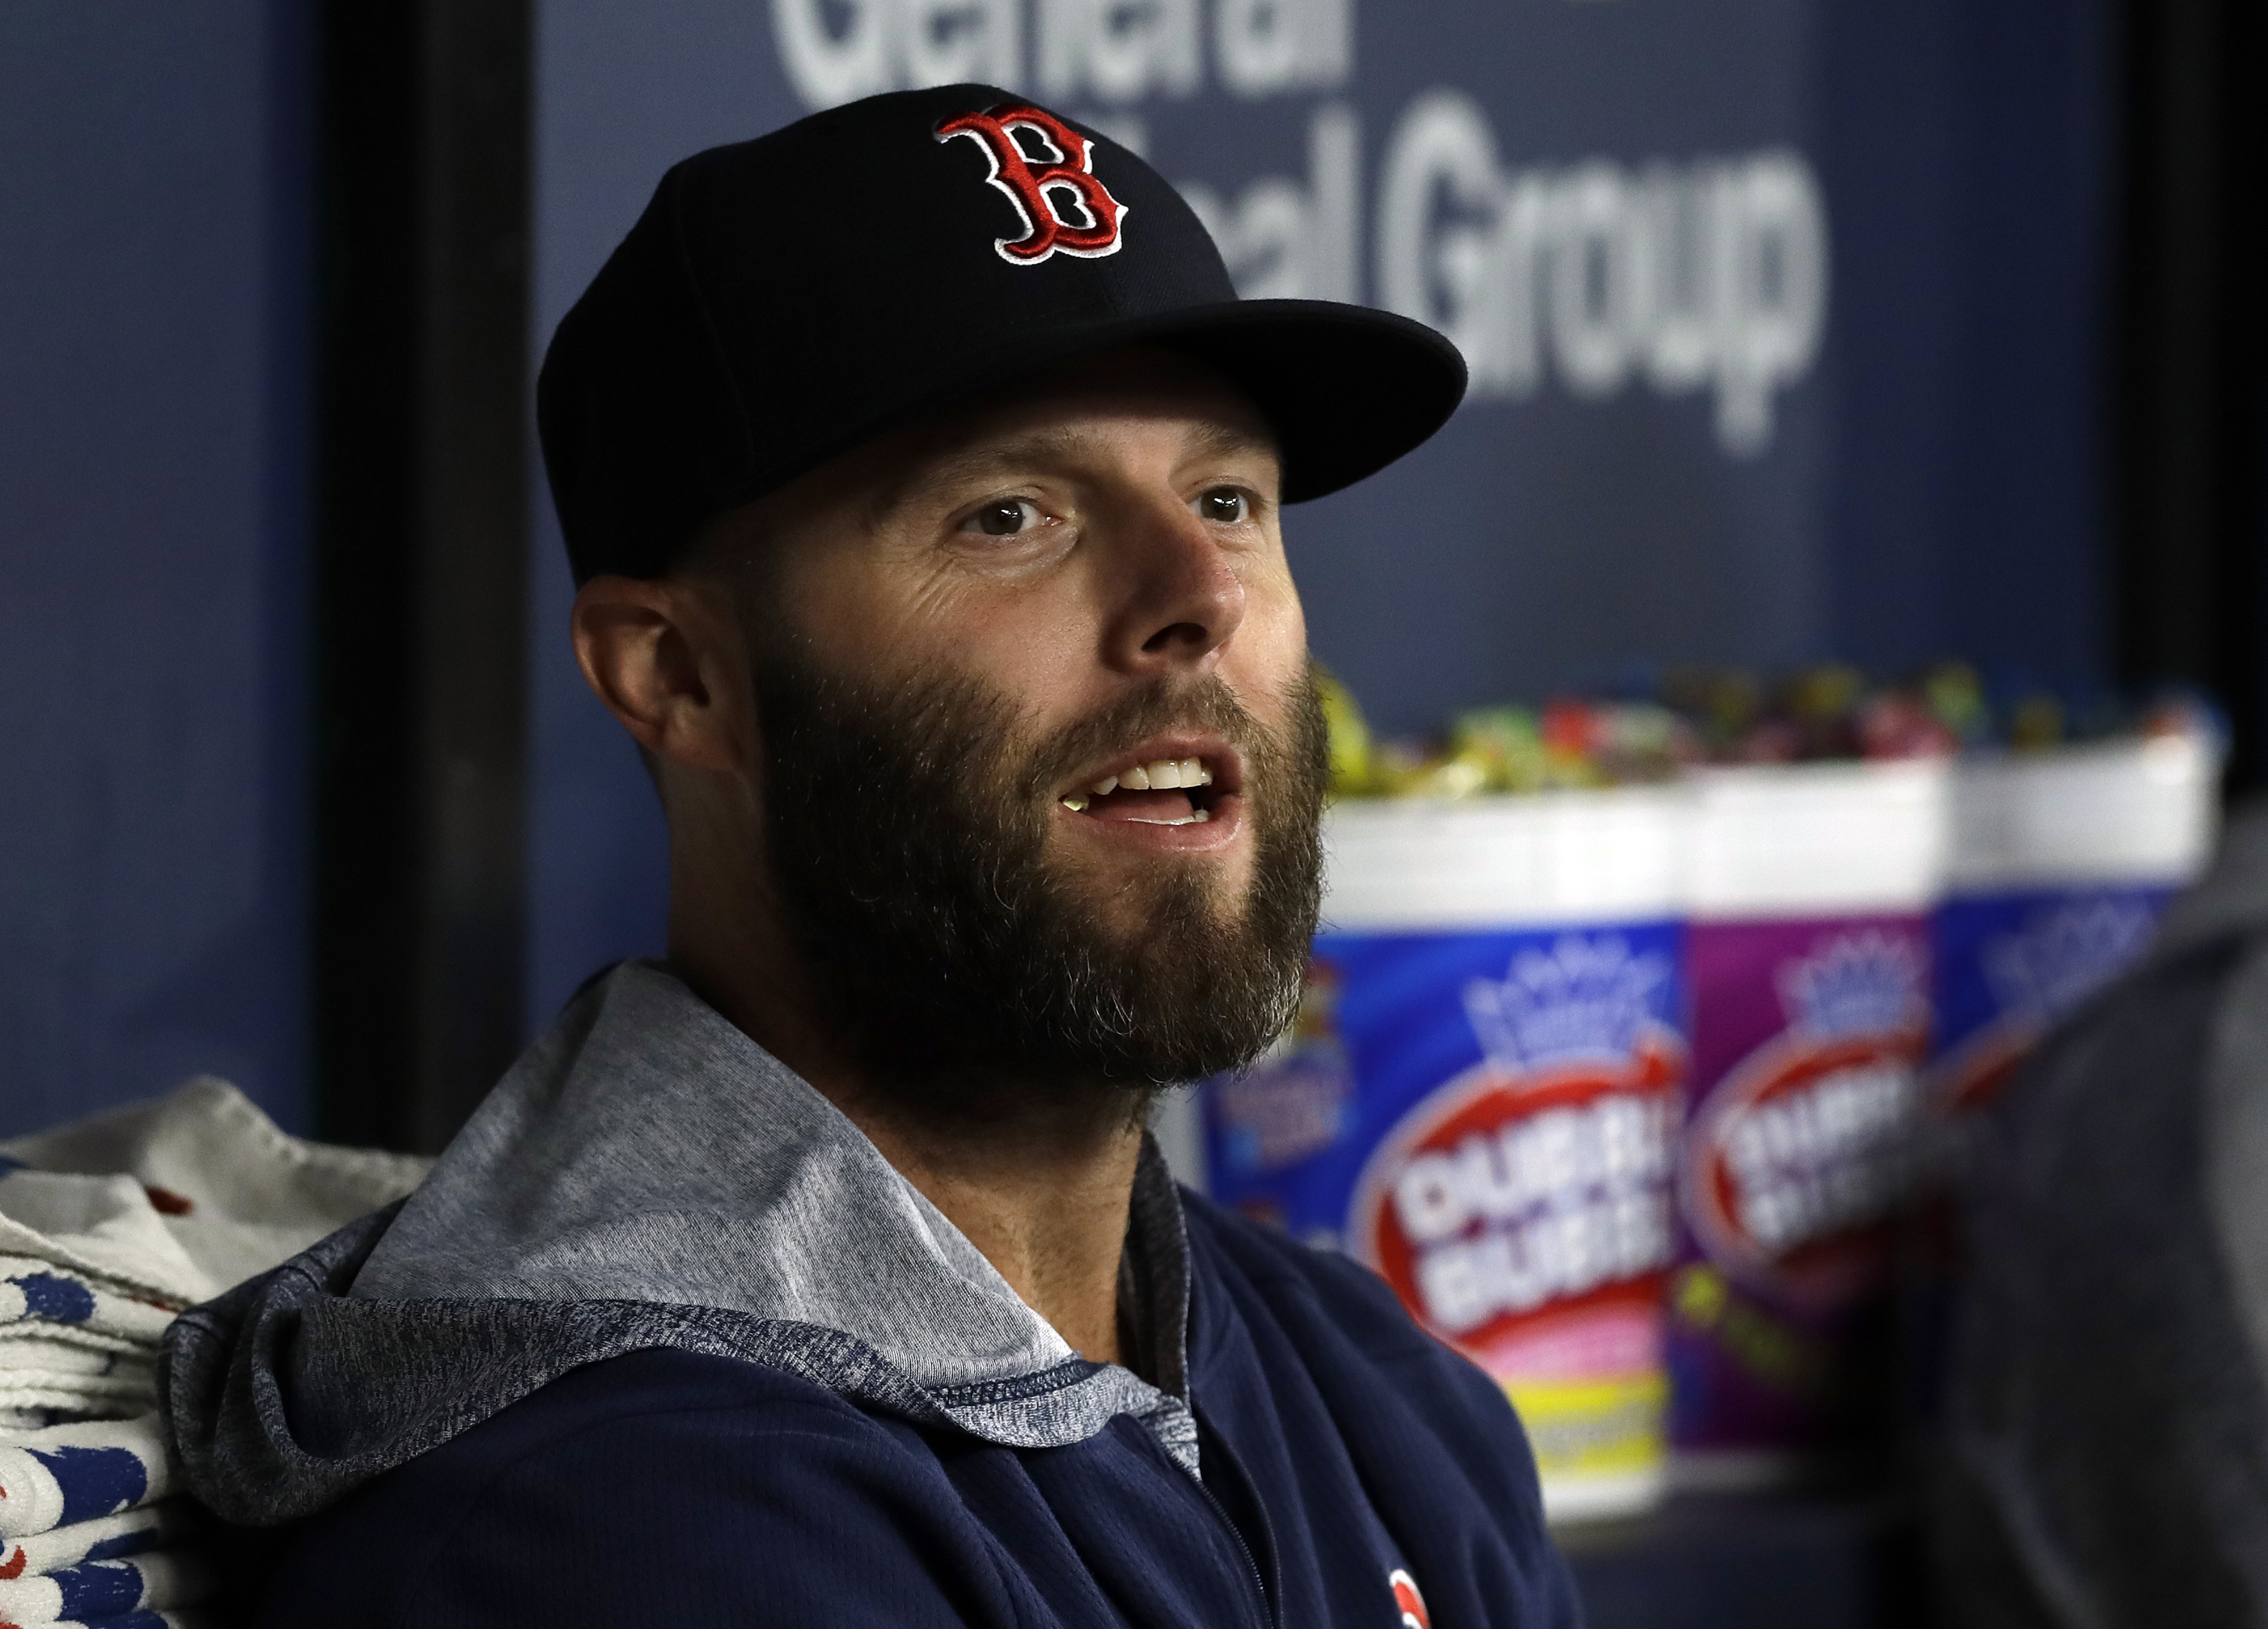 Dustin Pedroia, his sons among Boston Red Sox's newest cardboard cutout  fans placed in Fenway Park box seats 